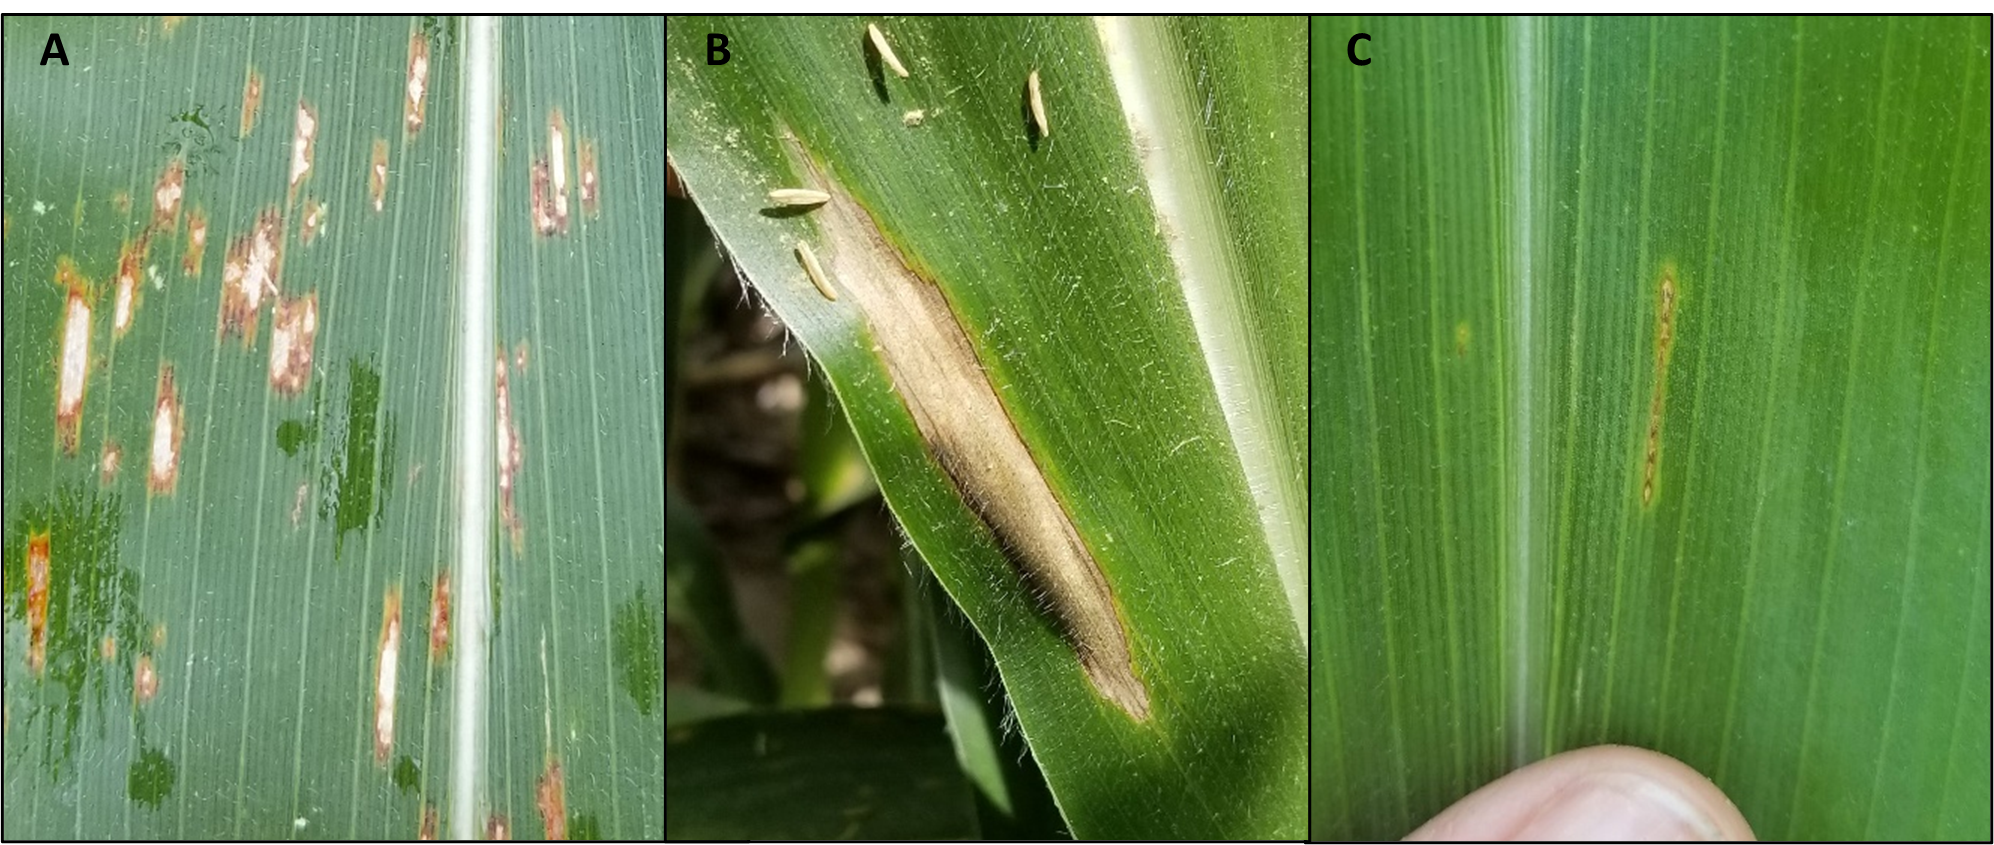 Figure 1. Examples of A-gray leaf spot, B-northern corn leaf blight, and C-northern corn leaf spot lesions on a corn leaf. (Photo Credits: Darcy Telenko)